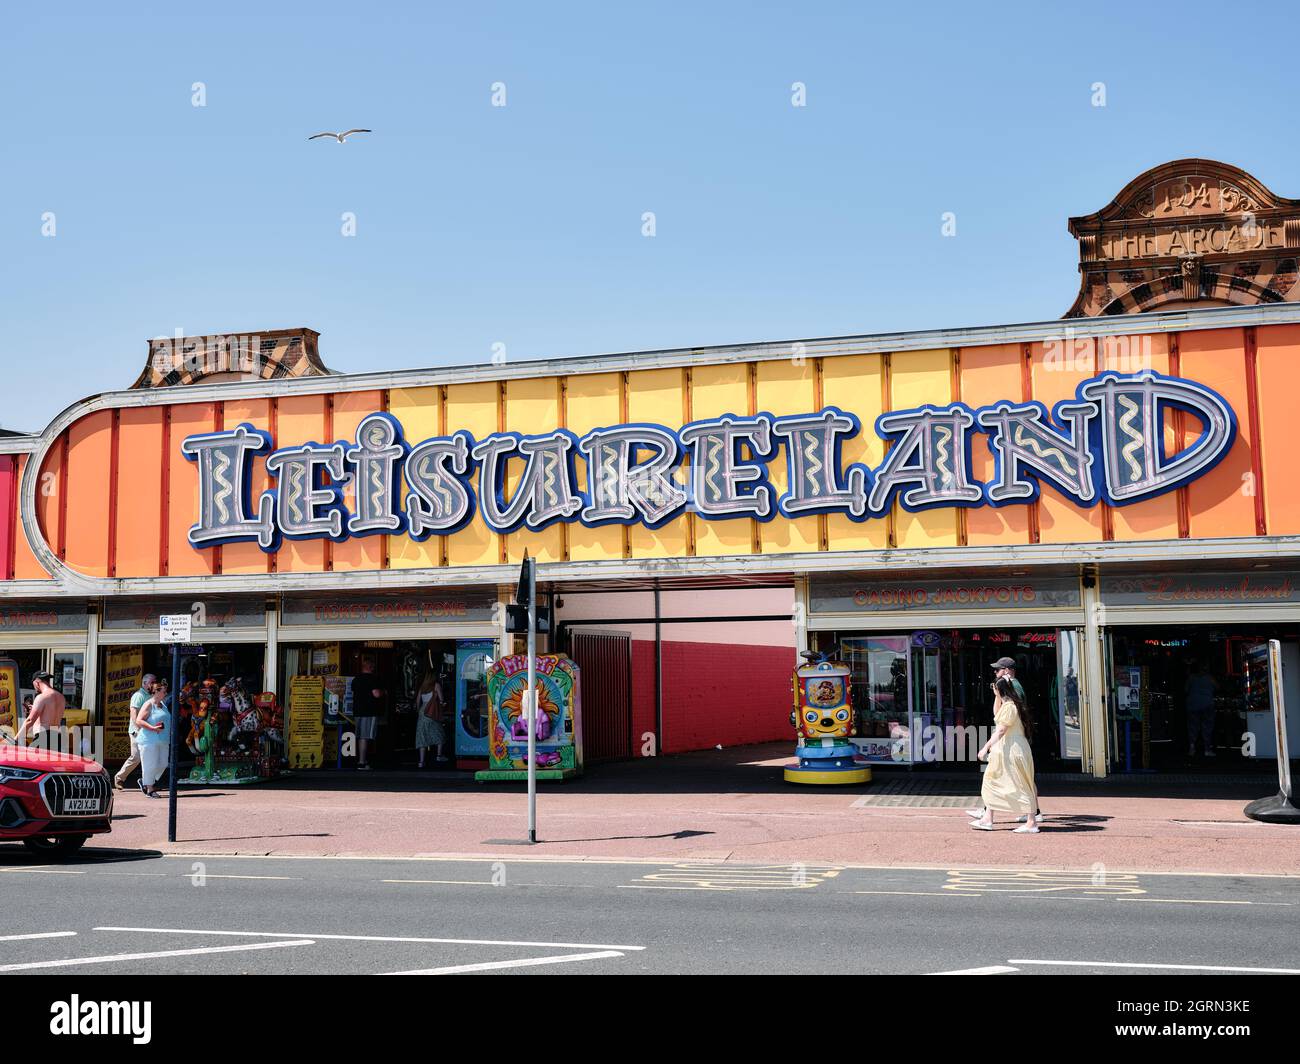 Leisureland Amusement Arcade - The colourful seafront architecture of Marine Parade Great Yarmouth seaside resort town on the Norfolk coast England. Stock Photo